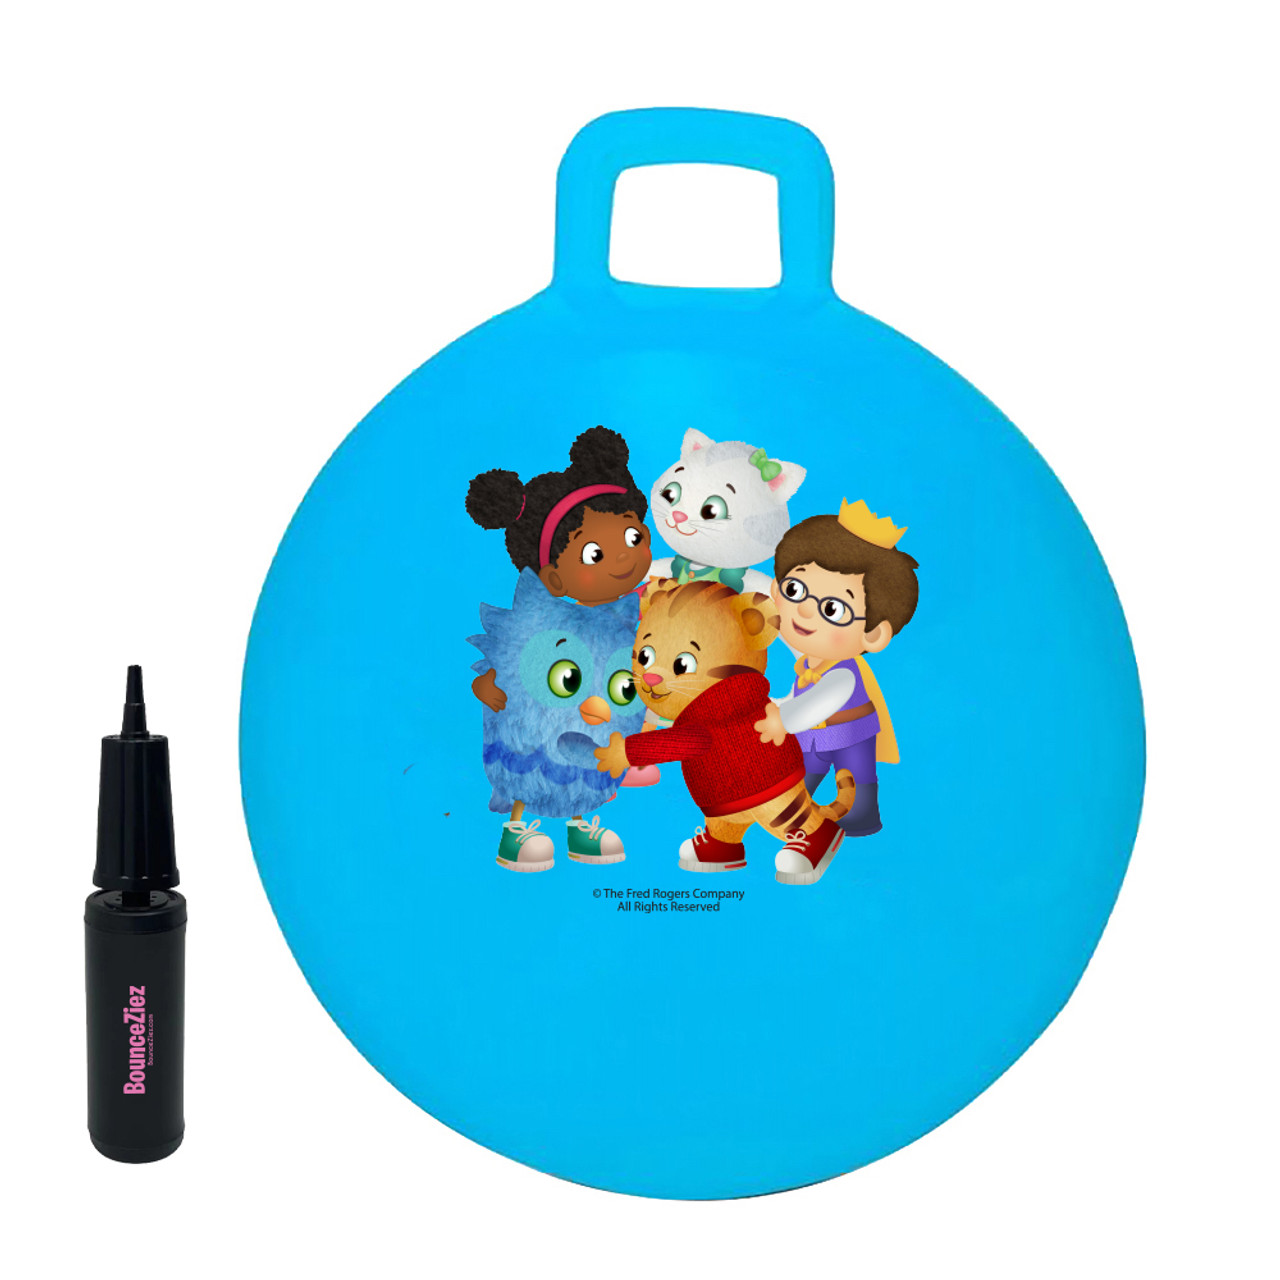 Daniel the Tiger 15-inch Hopper Ball product image